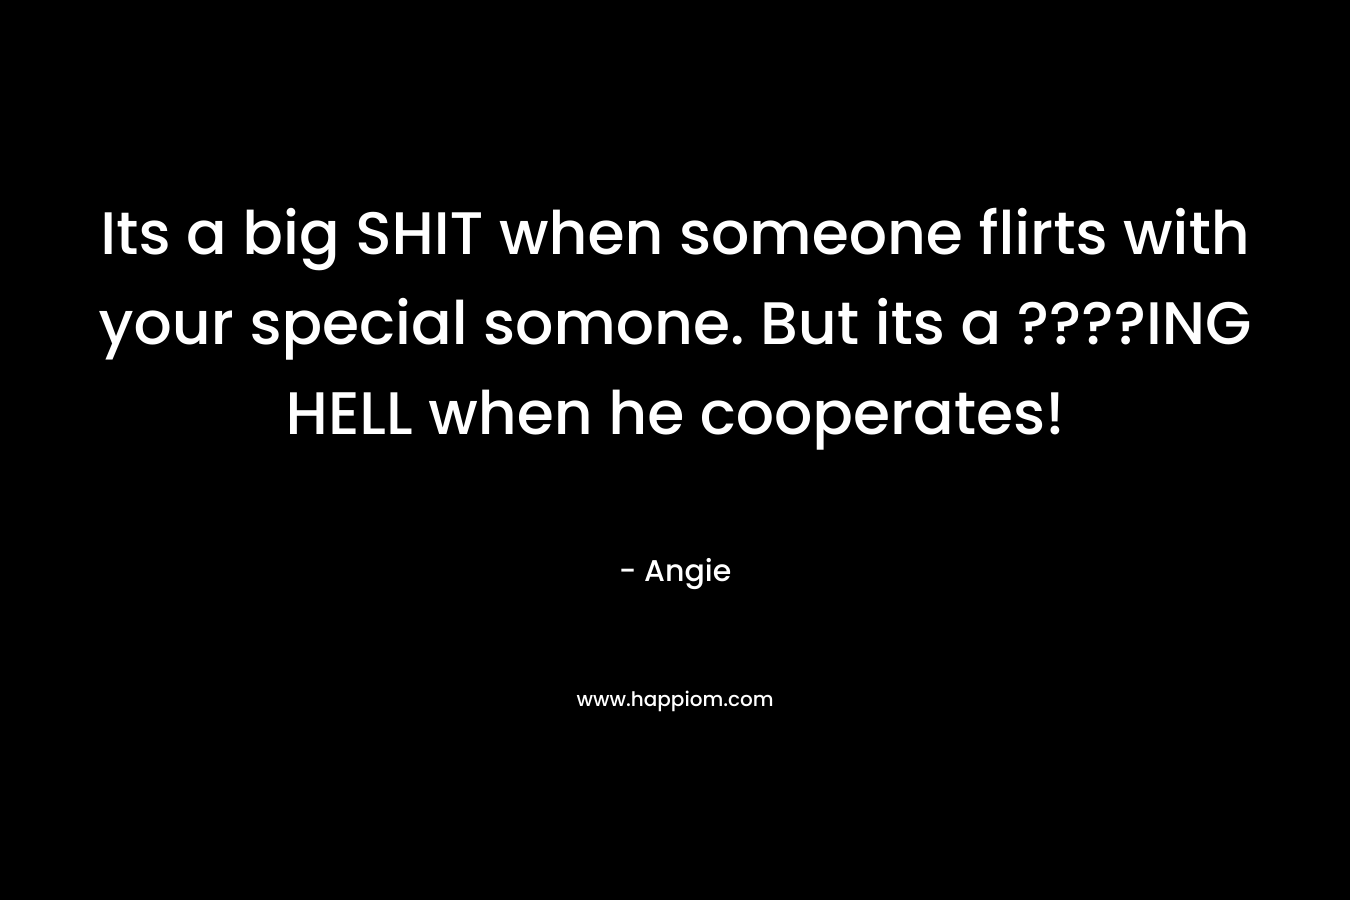 Its a big SHIT when someone flirts with your special somone. But its a ????ING HELL when he cooperates! – Angie